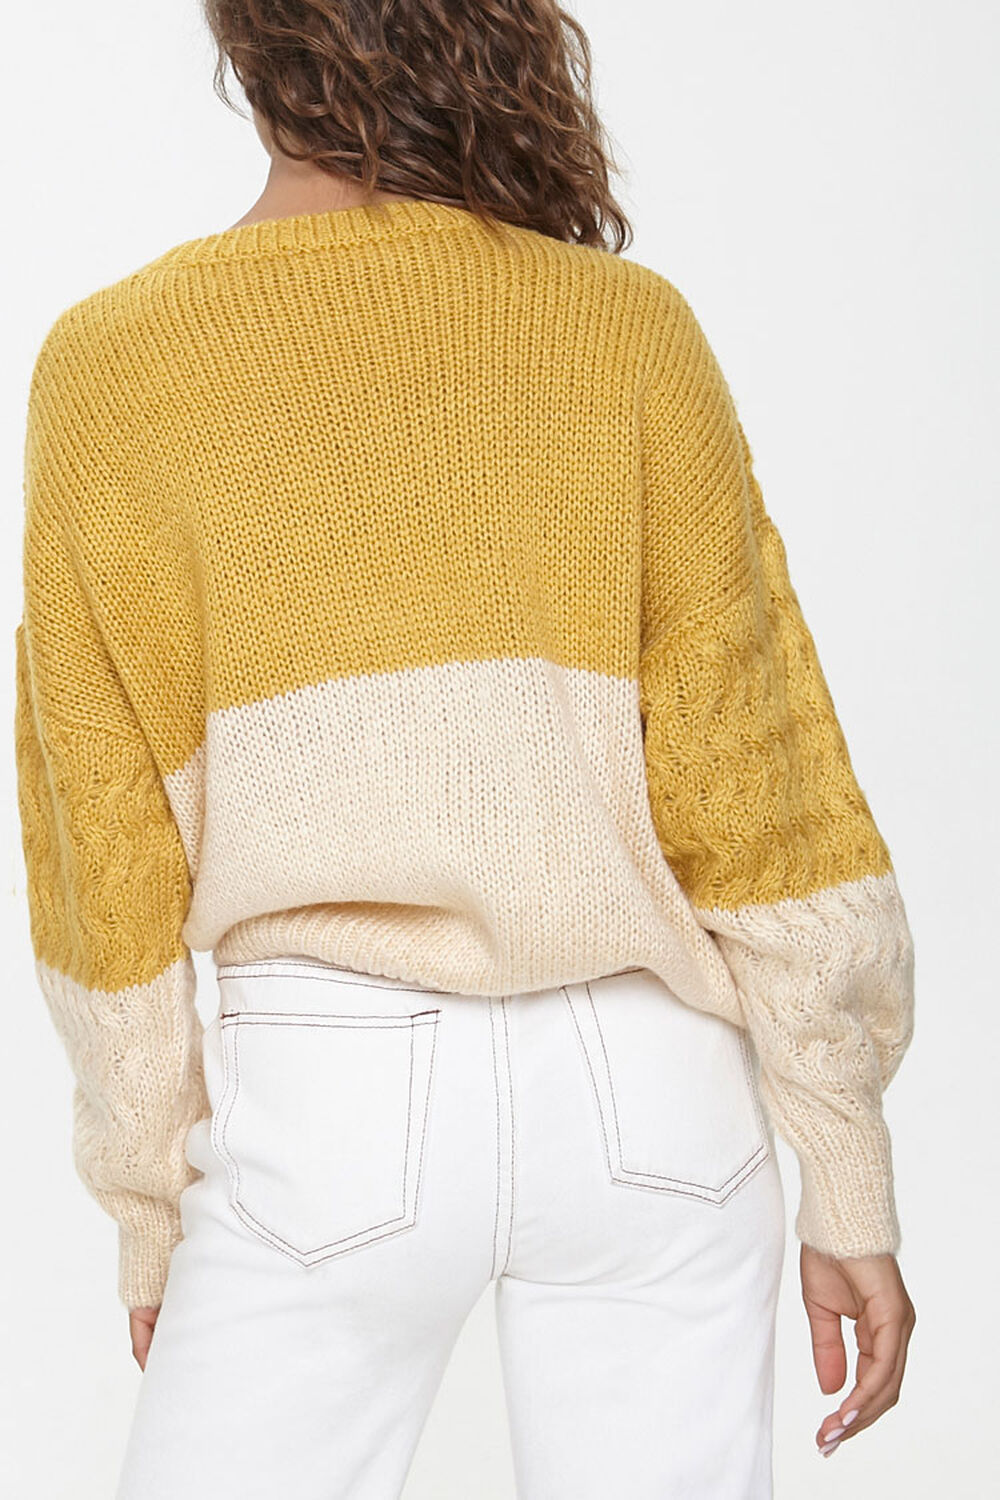 MUSTARD/IVORY Colorblock Cable Knit Sweater, image 3